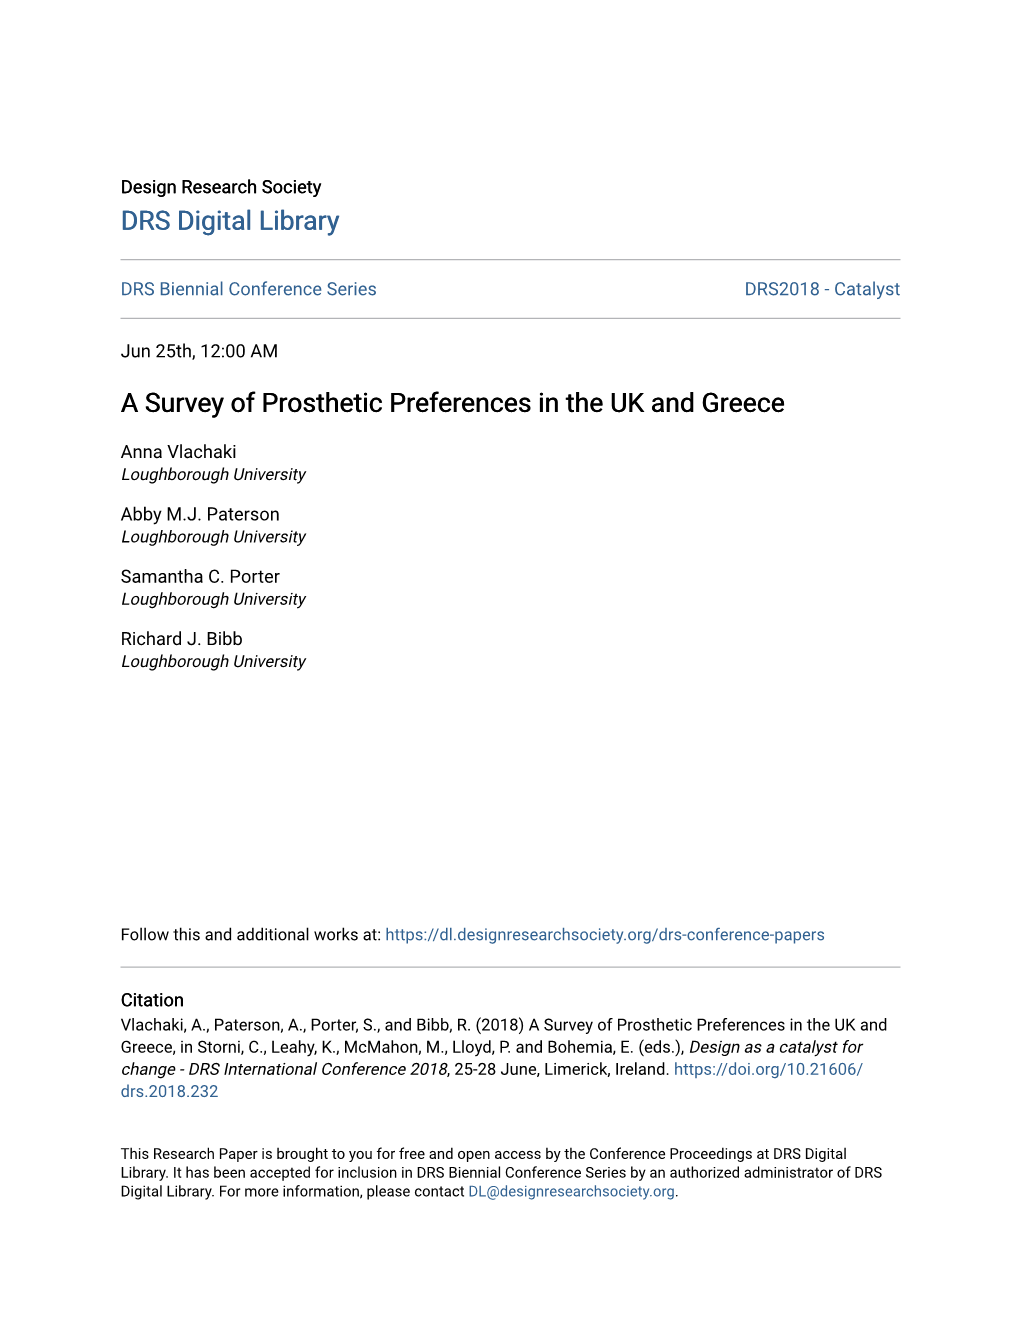 A Survey of Prosthetic Preferences in the UK and Greece